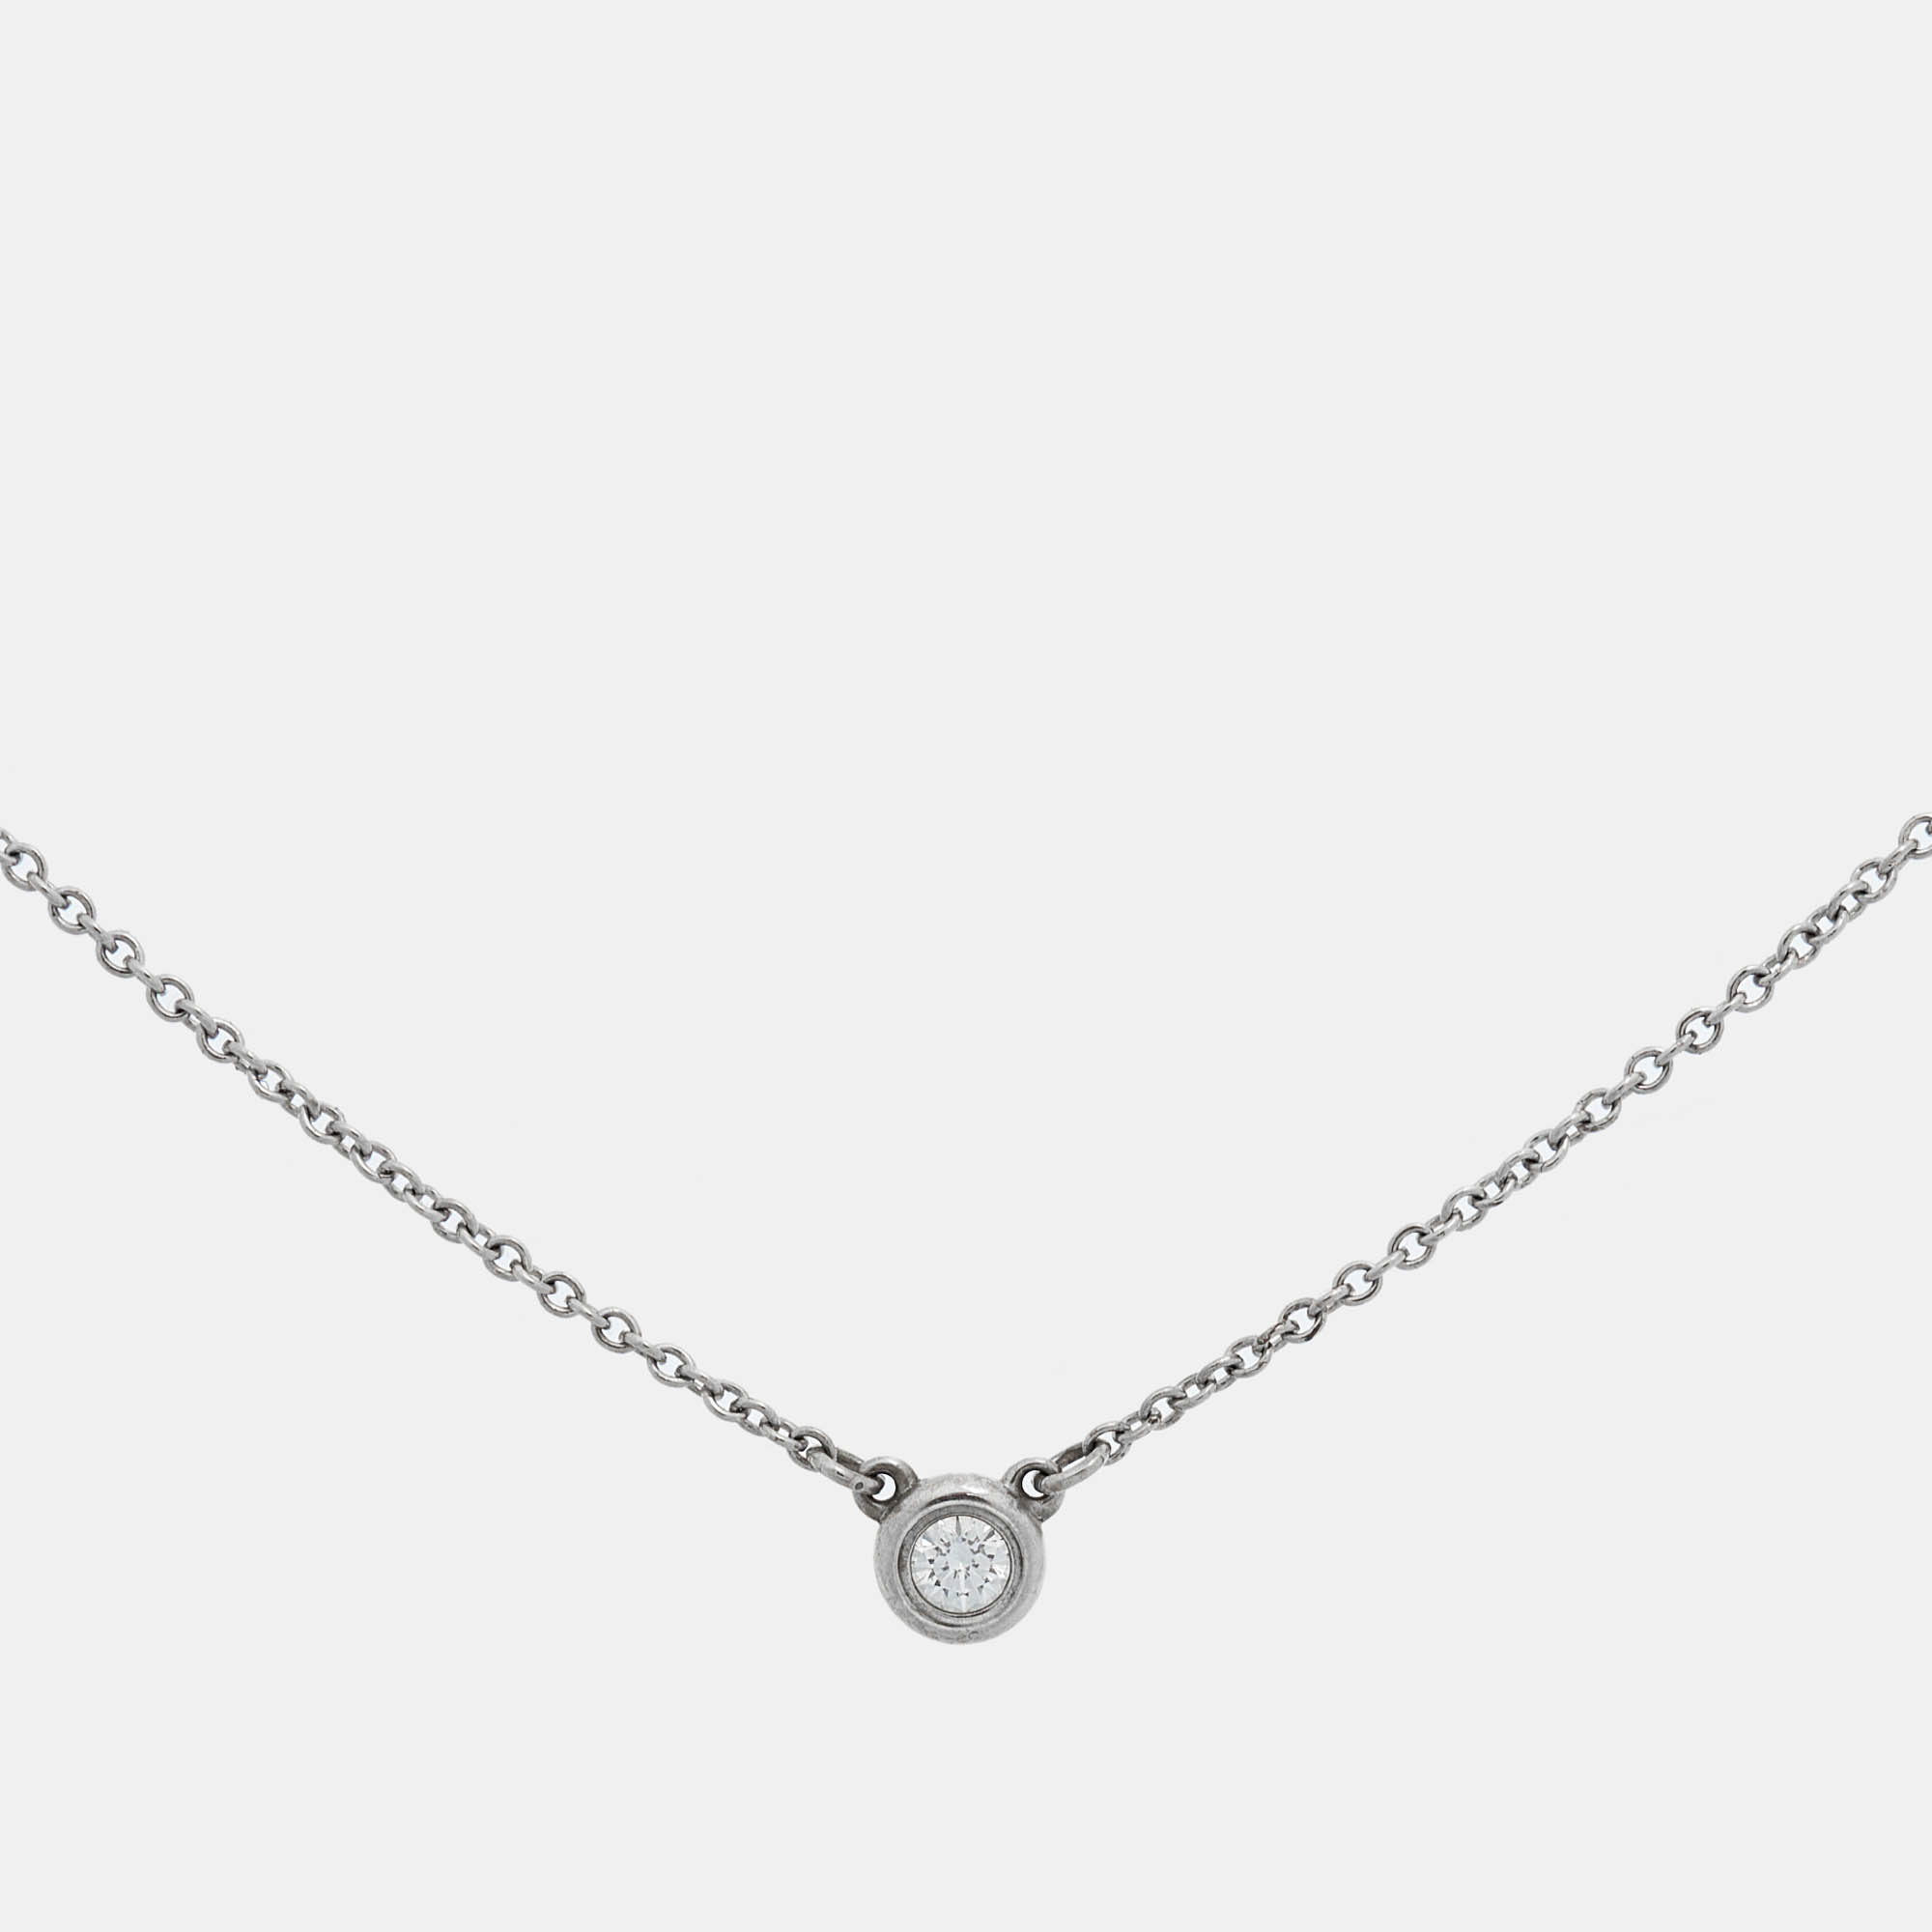 

Tiffany & Co. Elsa Peretti Diamonds By the Yard Sterling Silver Necklace